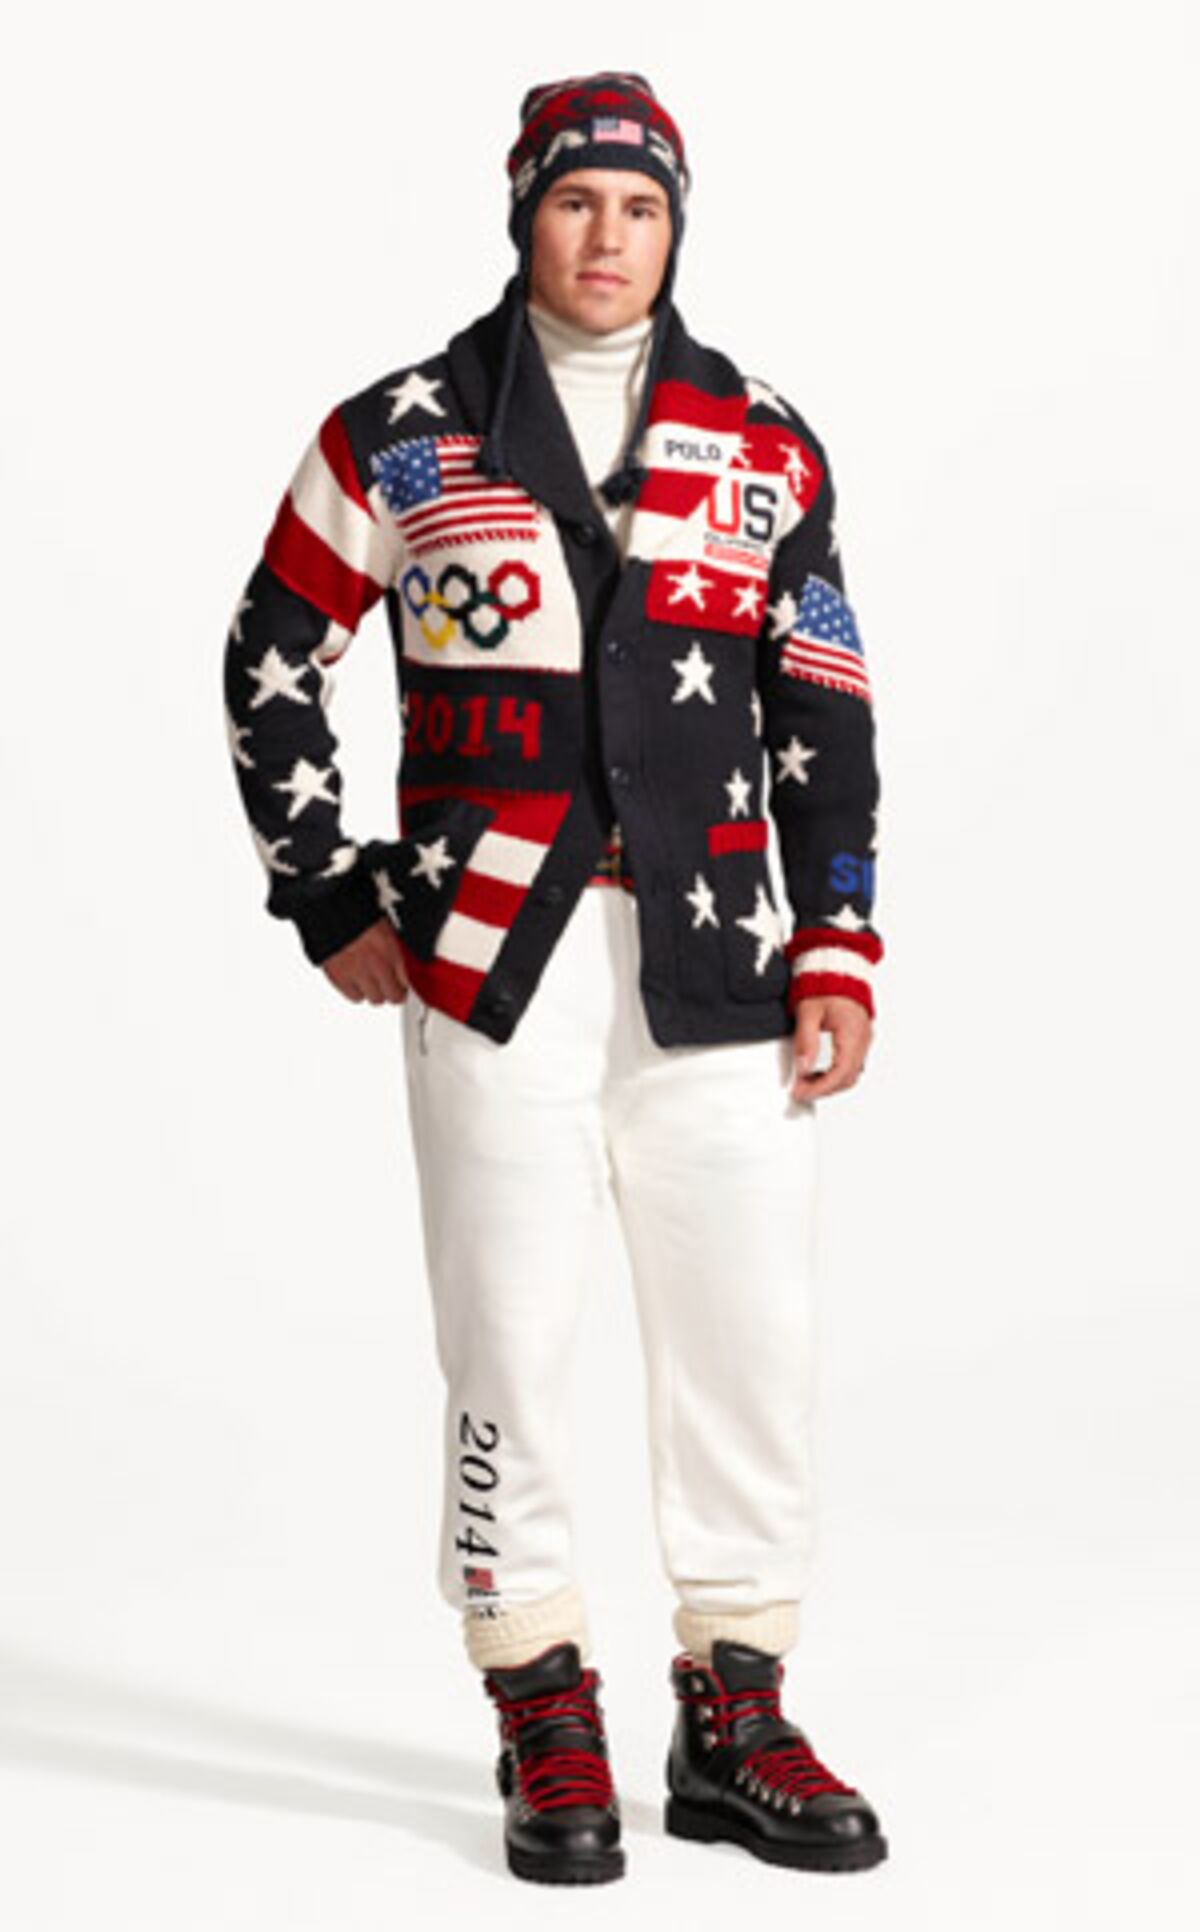 Ralph Lauren Wins With (Ugly?) Olympic Clothes - Bloomberg